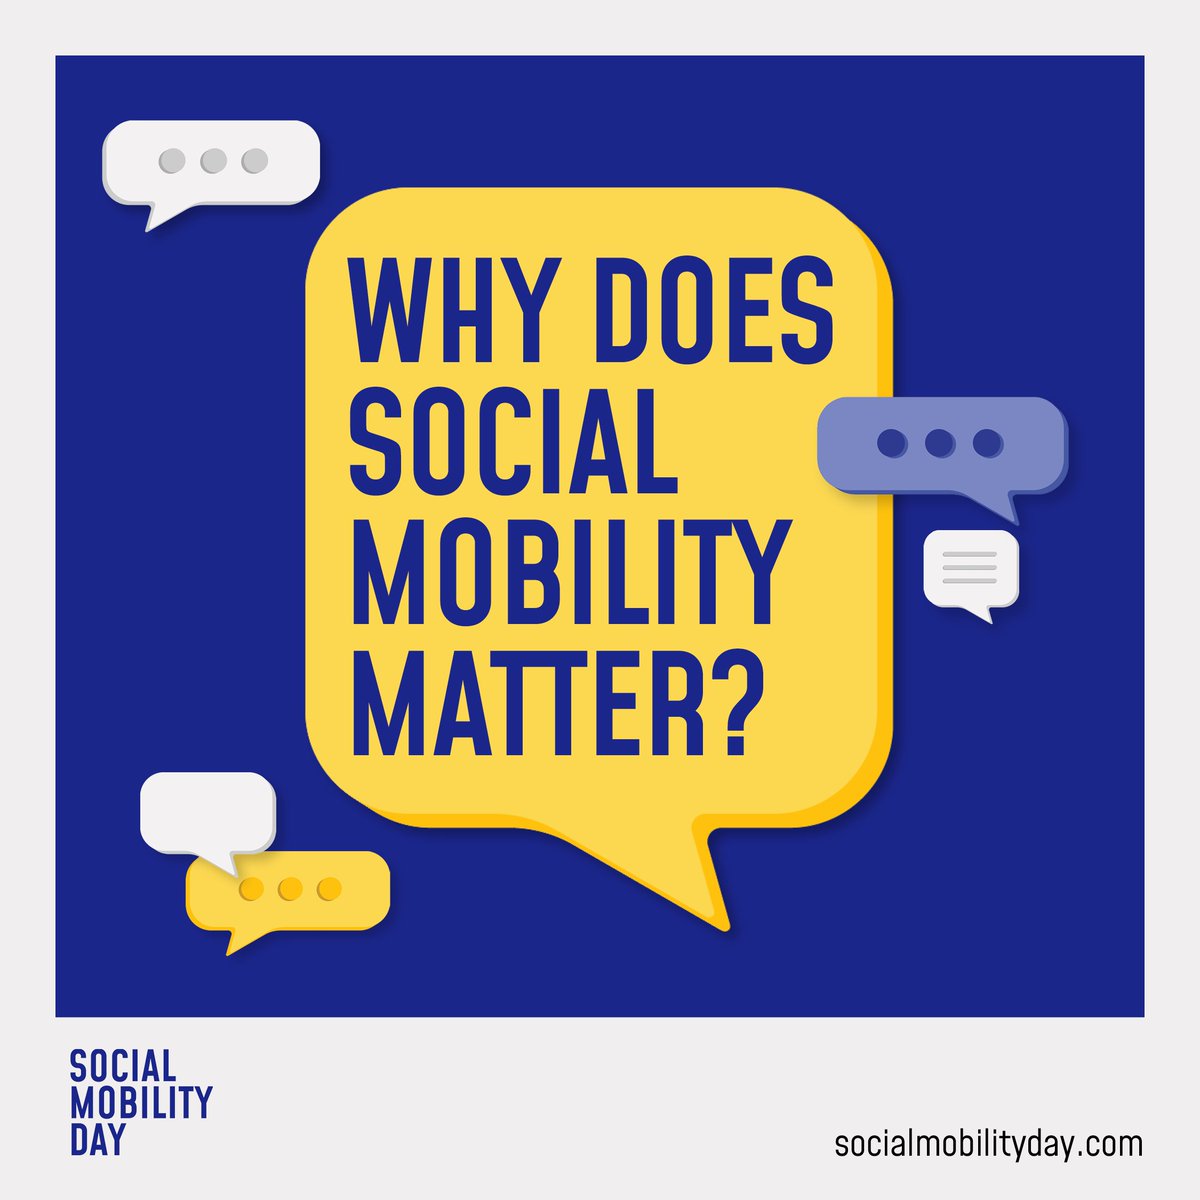 Social mobility is about ensuring the circumstances of a person’s birth do not determine their outcomes in life. 

It’s about fostering a culture where individuals can achieve their potential, regardless of where their journey began. 

Today is #SocialMobilityDay